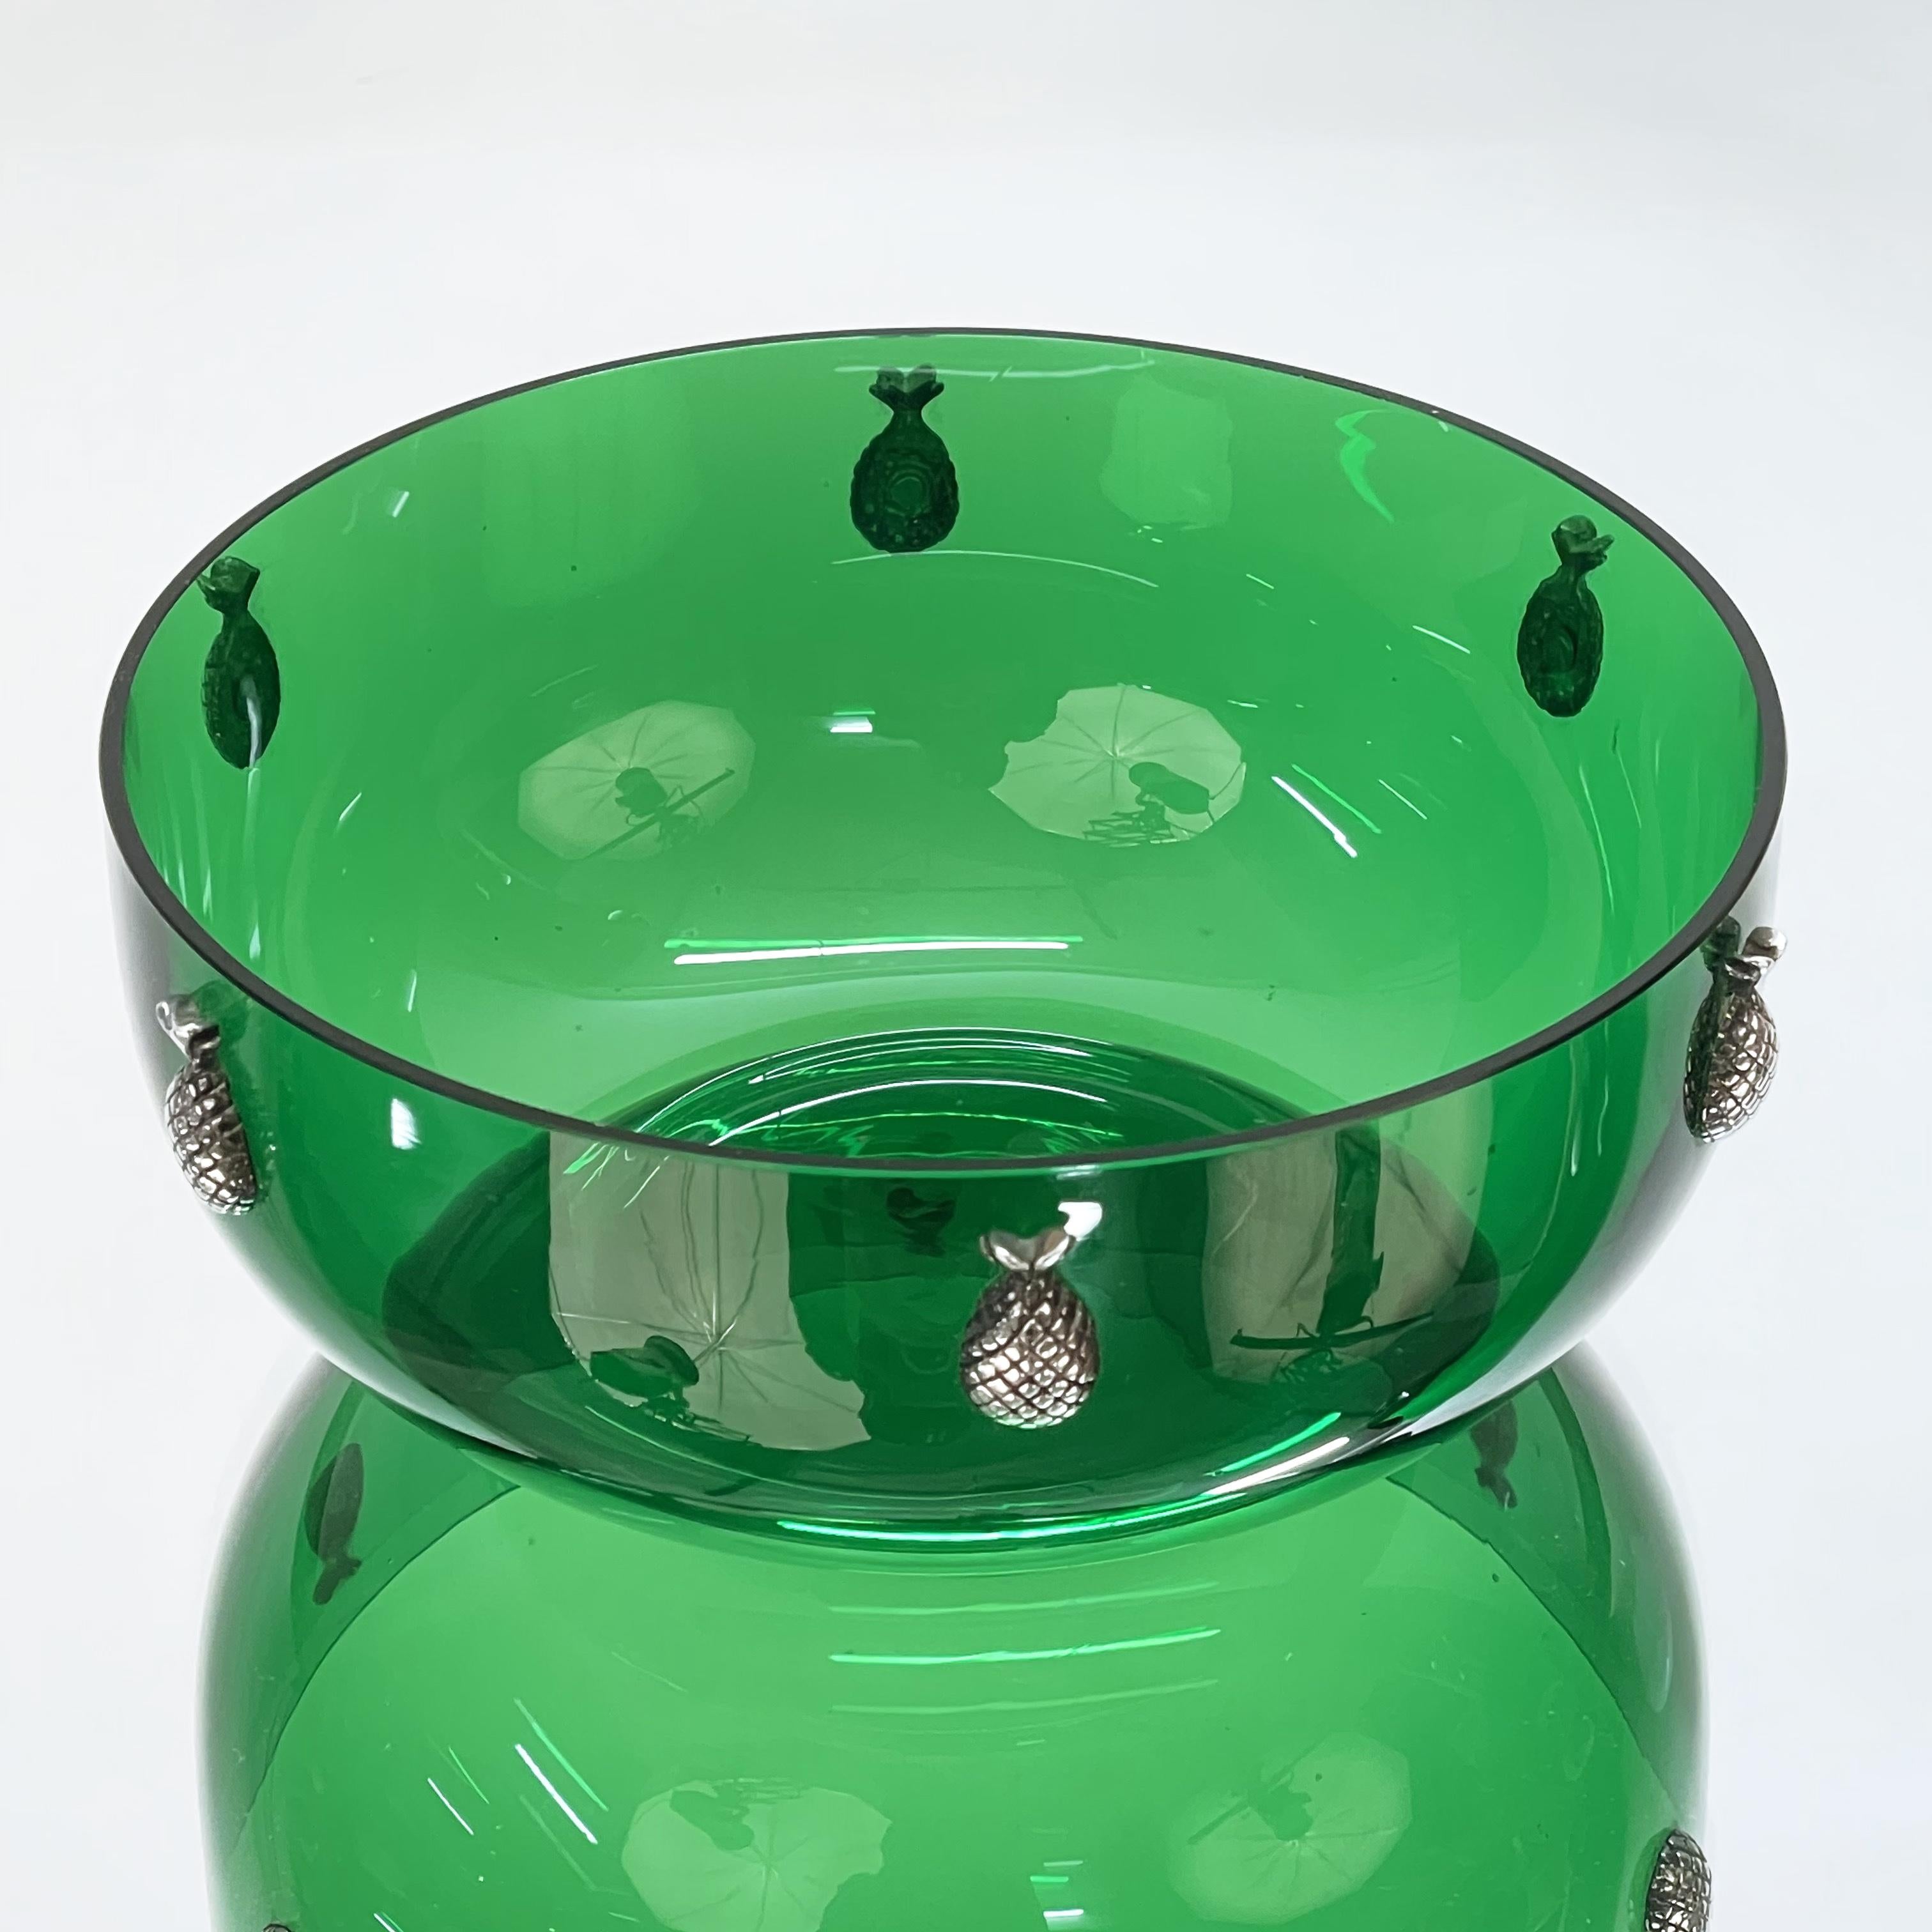 Amazing midcentury centrepiece Murano glass and silver-plated finishes. This fantastic piece was designed in Italy by Cleto Munari during the 1980s.

This wonderful item is made of vivid Murano green glass with eight silver-plated pineapples.